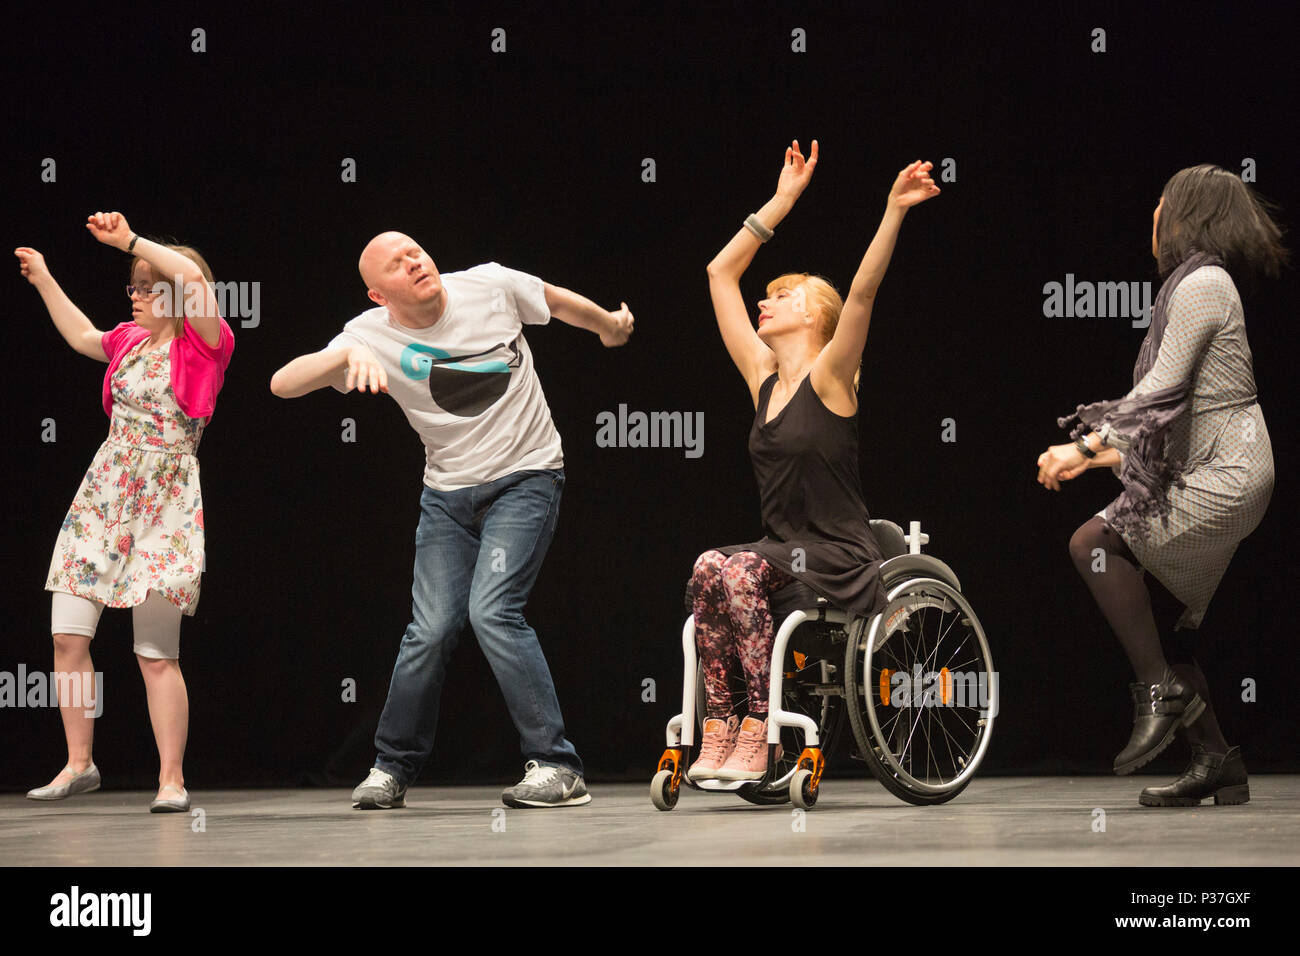 London, UK. 20 March 2015.  L-R: Katy Francis, Gary Clarke. Suzie Birchwood and Jia-Yu Corti. Sadler's Wells presents a weekend of inclusive dance from 20 to 22 March 2015. Candoco Dance Company, a contemporary dance comapny of disabled and non-disabled performers presents a restaging of Jerome Bel's award-winning The Show Must Go On. The weekend also includes the final performances of the inaugural year of the Sadler's Wells =dance series, a presentation of inclusive dance by both established and emerging deaf and disabled artists in the Lilian Baylis Studio. Stock Photo